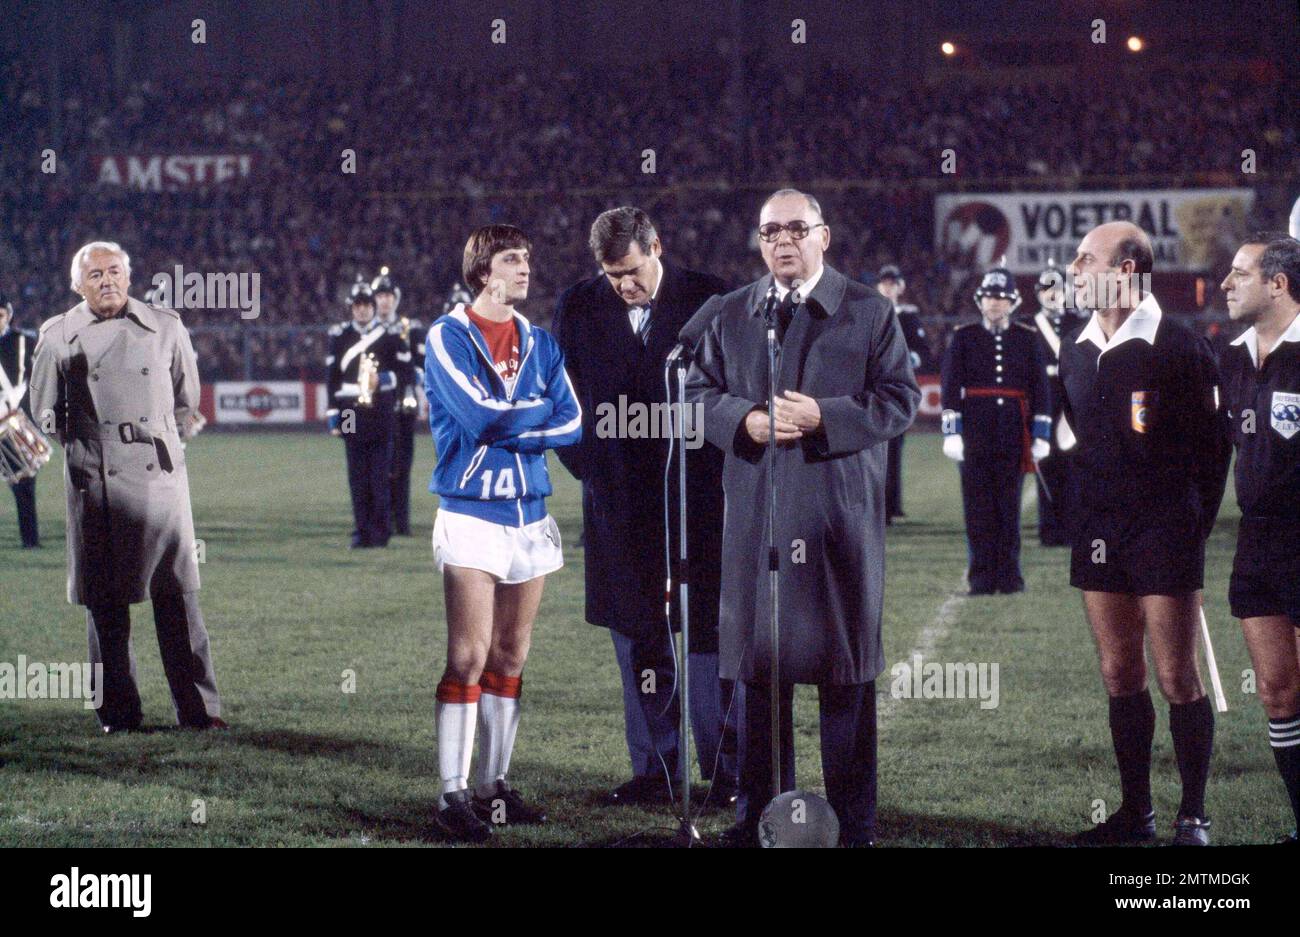 Johan Cruyff, in blue warm-up jacket, returns to his old team Ajax for the  final game of his career at Olympic Stadium in Amsterdam, Nov. 14, 1978.  Others are unidentified. (AP Photo